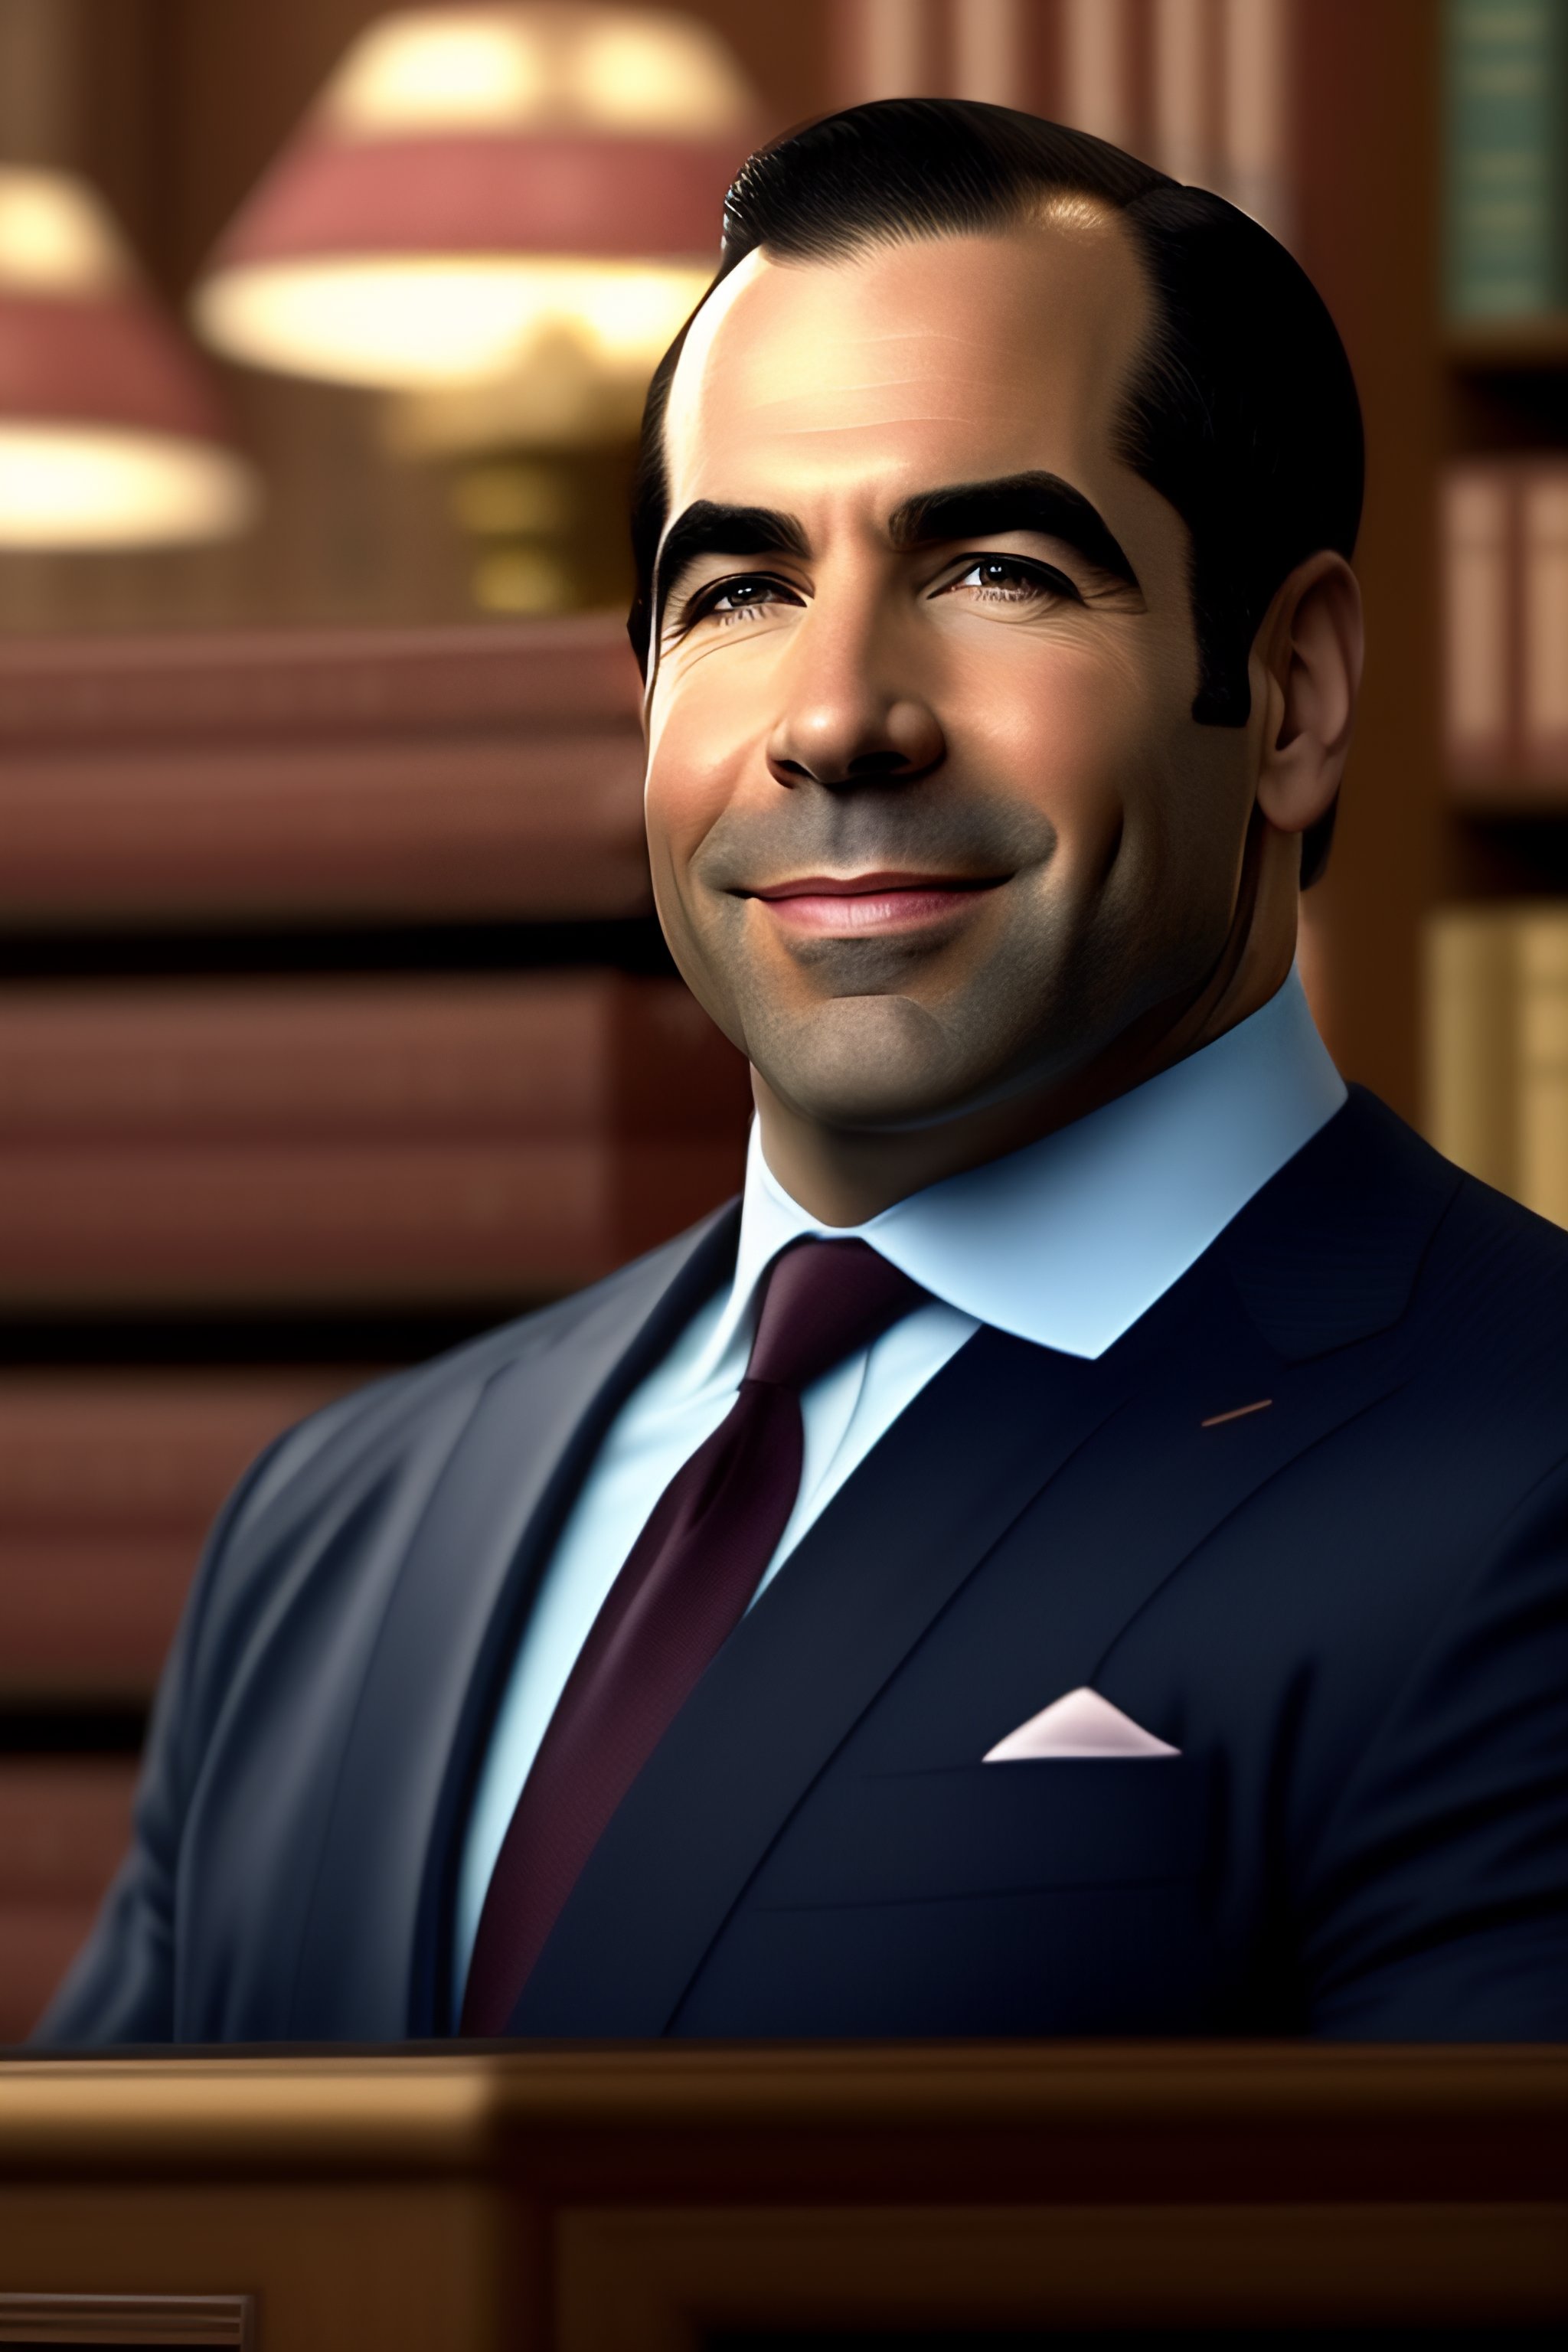 Lexica - Louis litt as a lawyer in a library. funny. realistic.